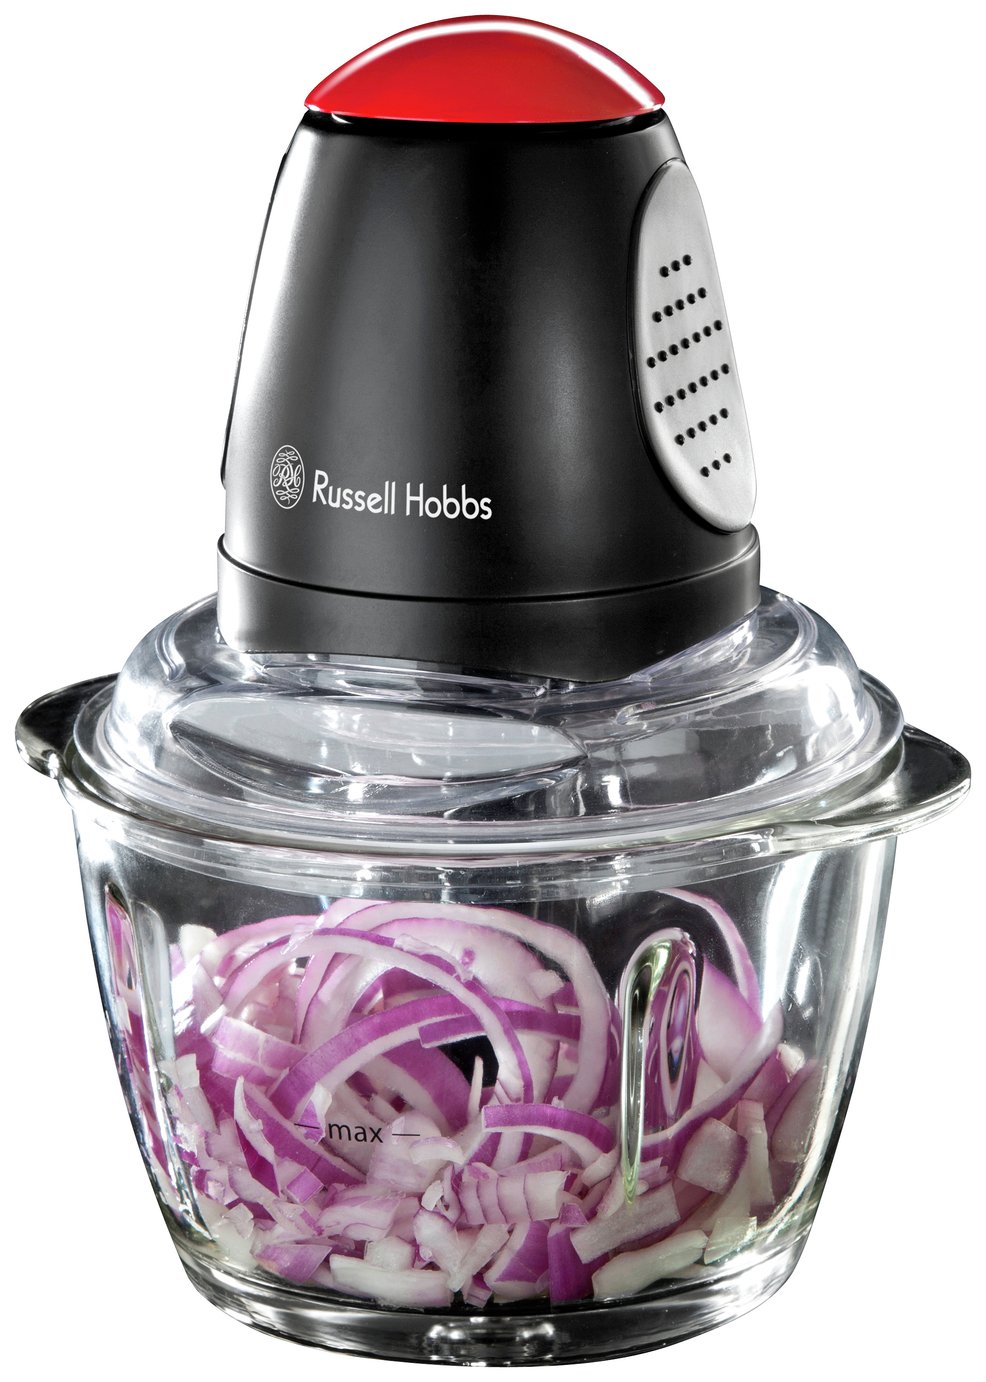 Russell Hobbs Desire Electric Mini Food Chopper 18558 review